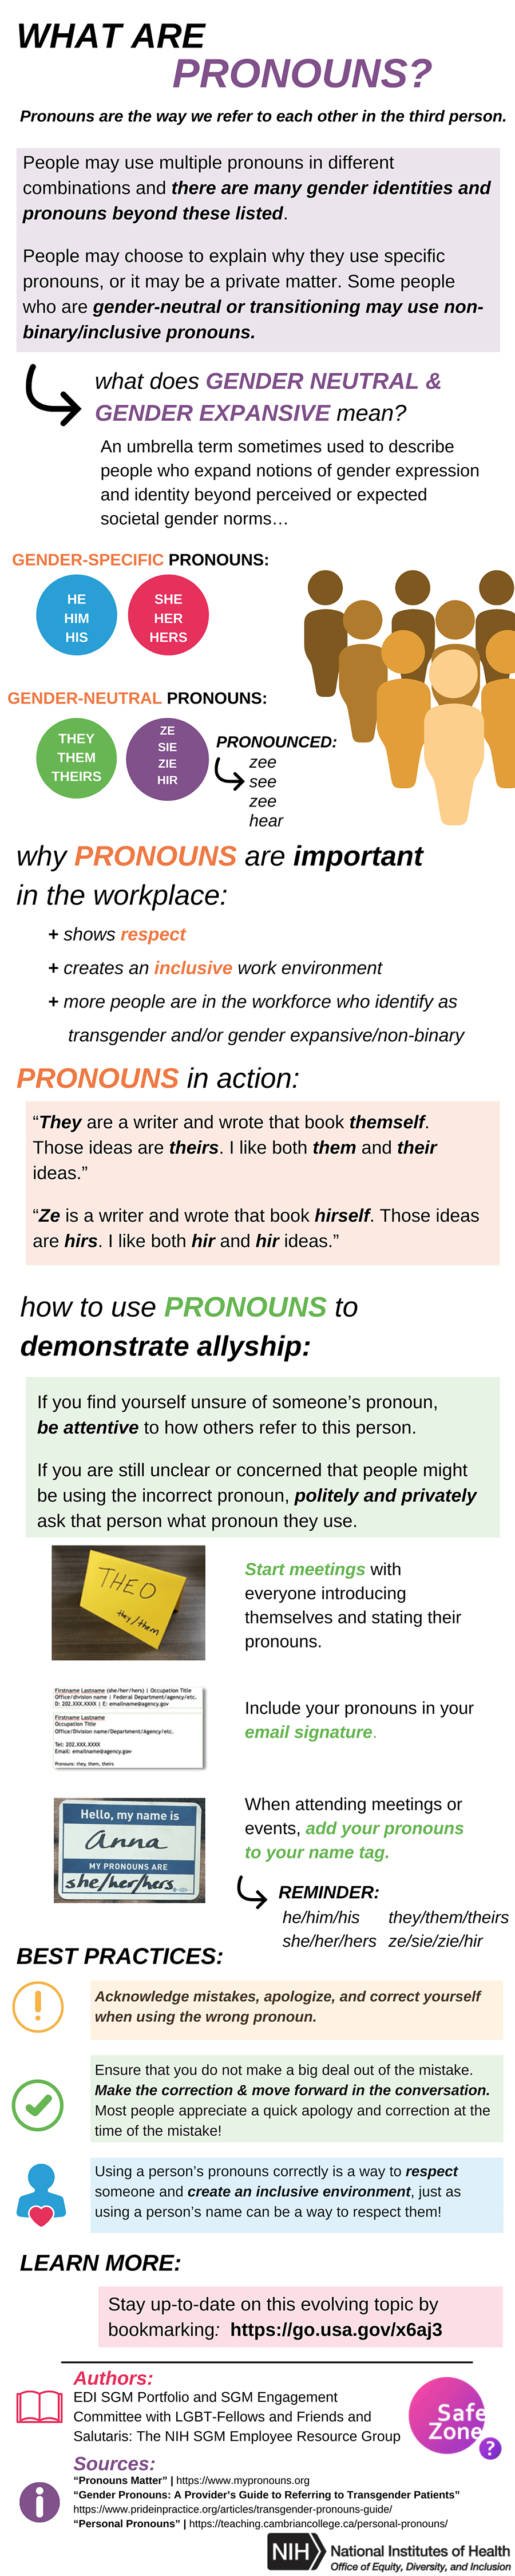 An infographic titled, 'What Are Pronouns?'.